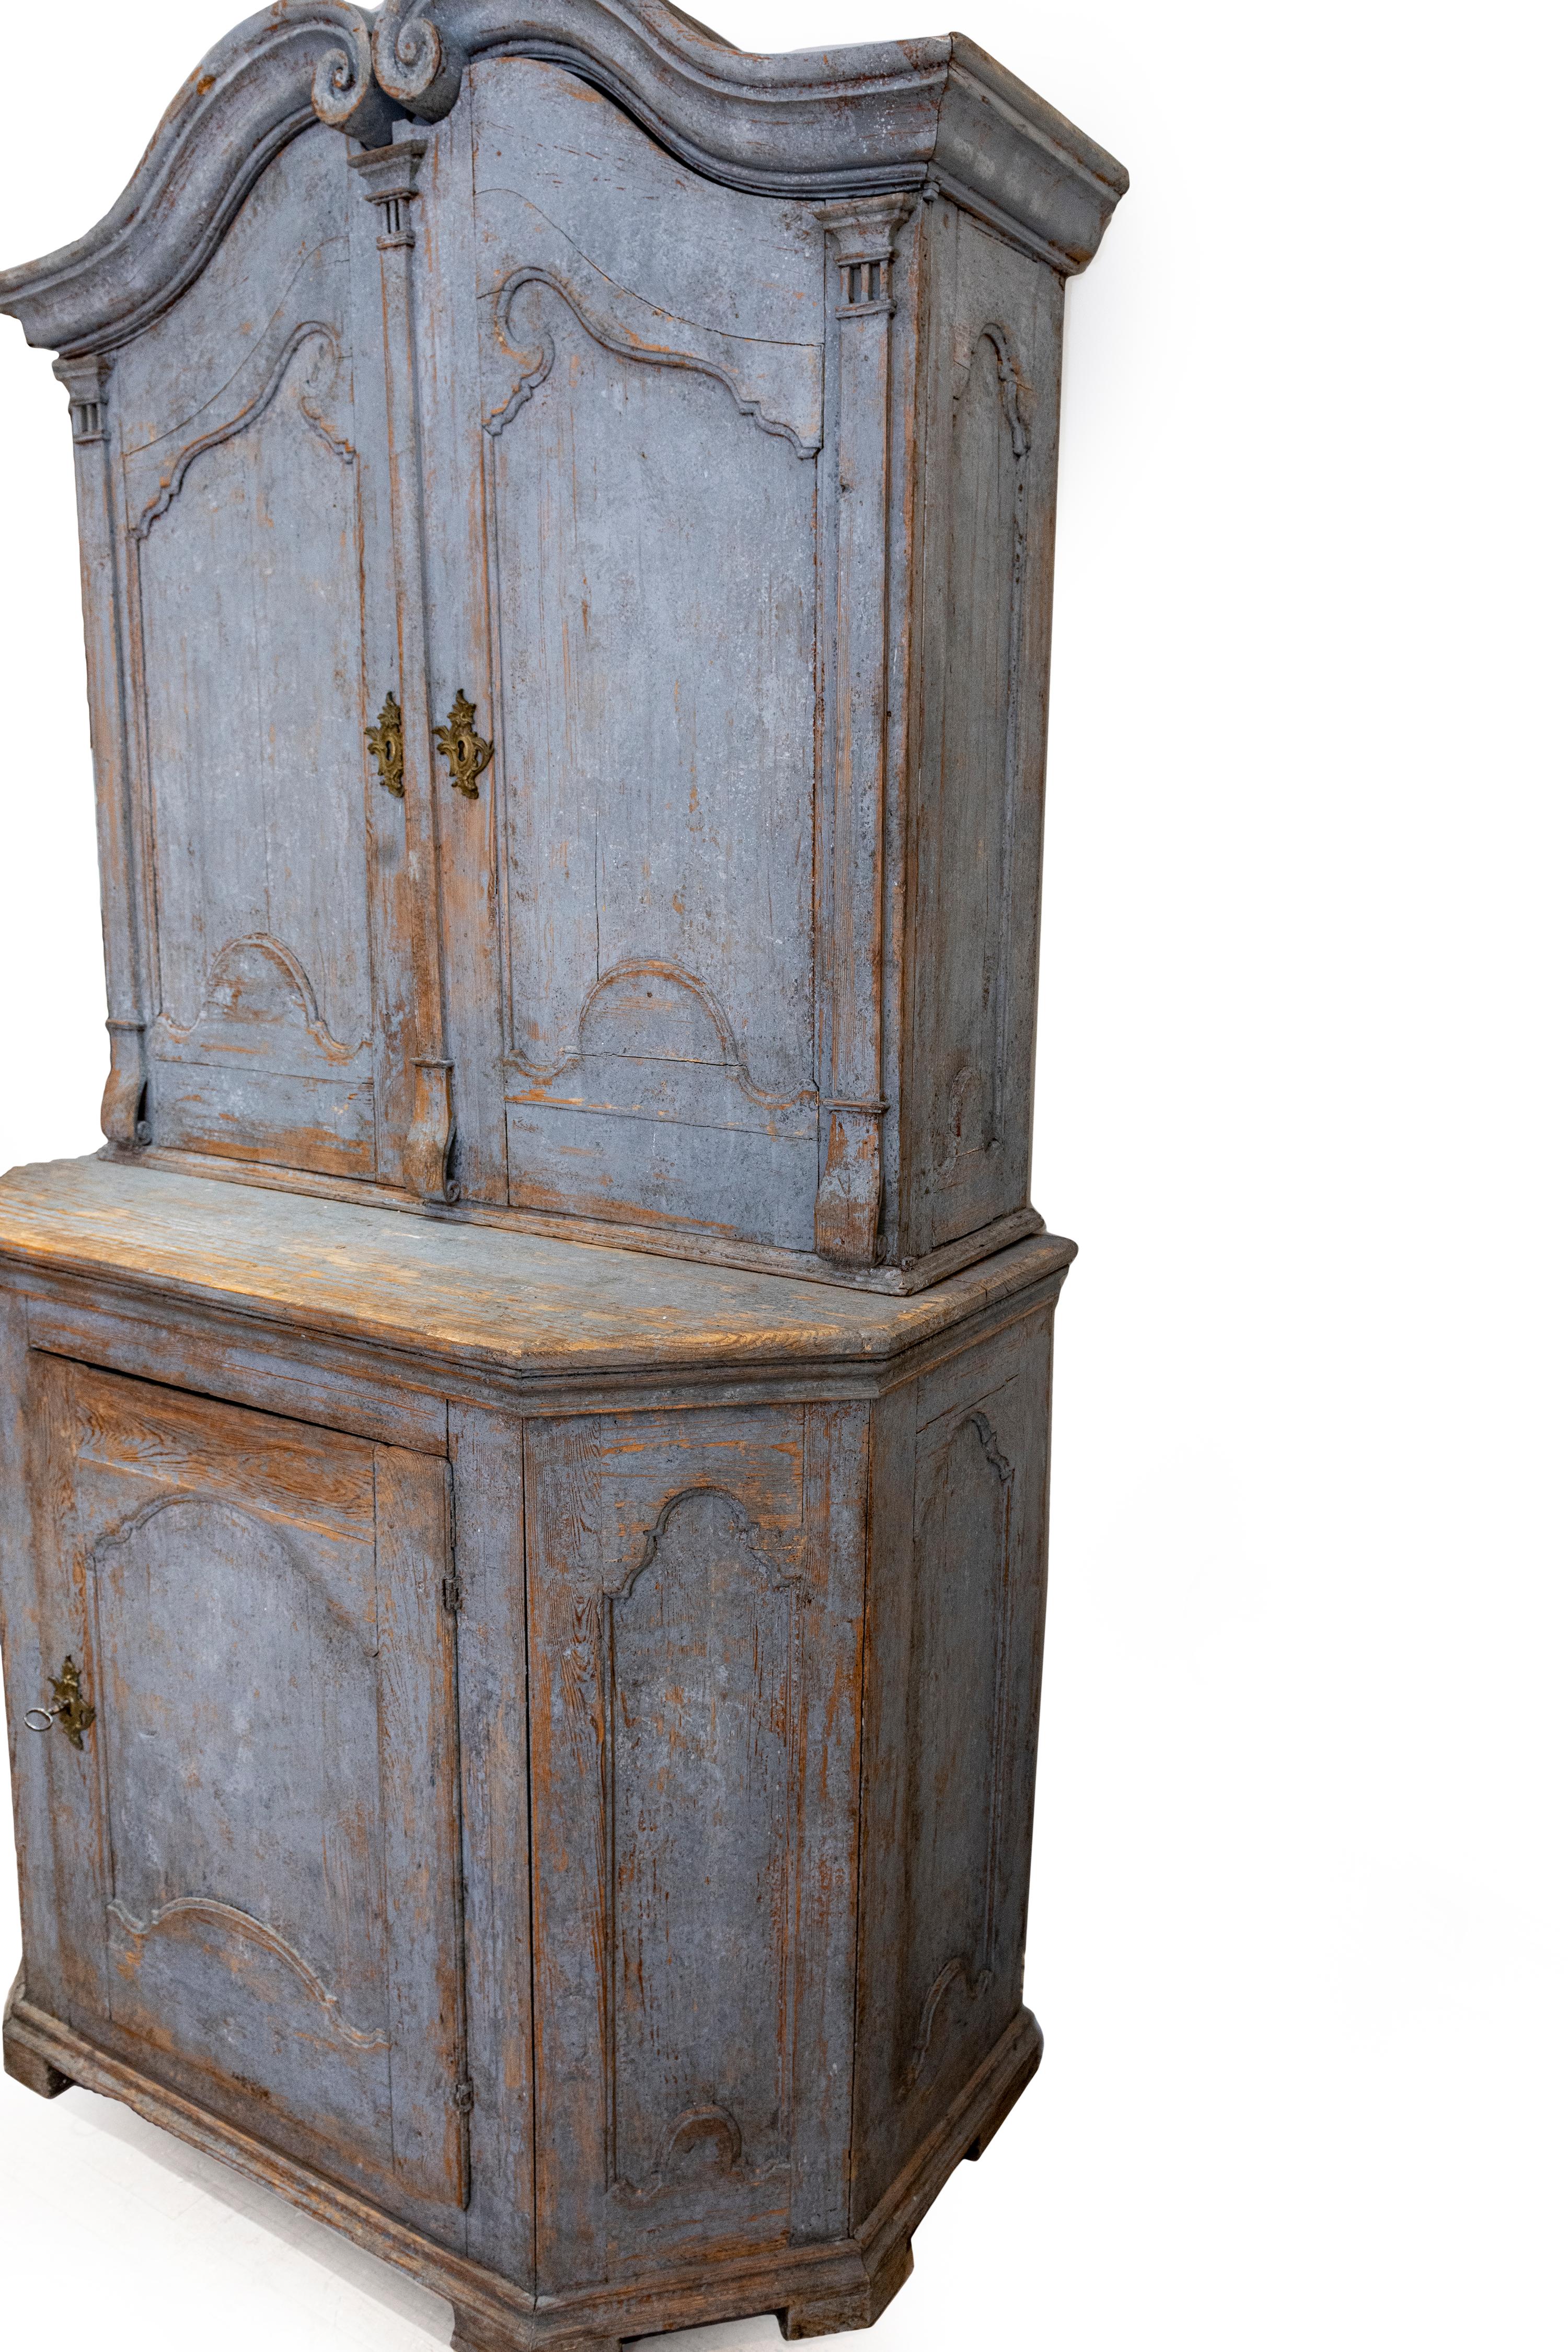 Original blue paint, carved wood display cabinet with unique original display shelving. Very sturdy cabinet in two pieces. Original shelving in the bottom cabinet as well.
 